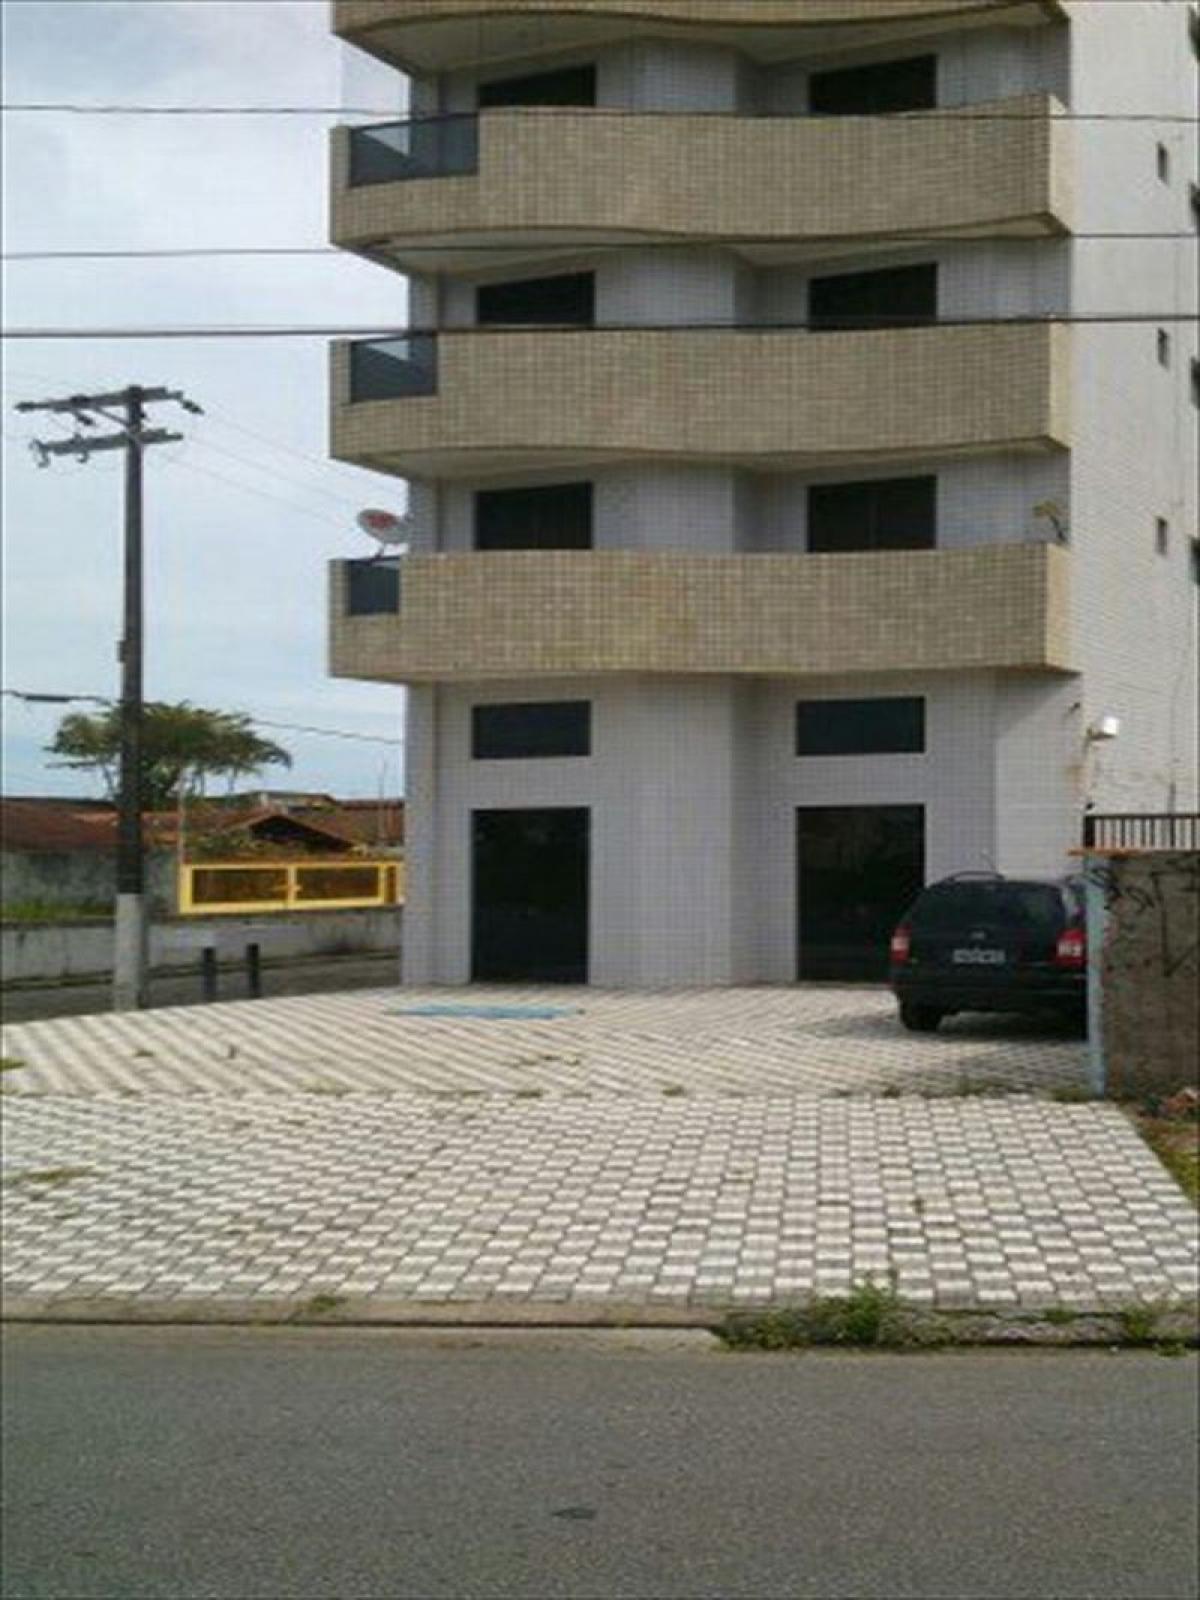 Picture of Commercial Building For Sale in Mongagua, Sao Paulo, Brazil